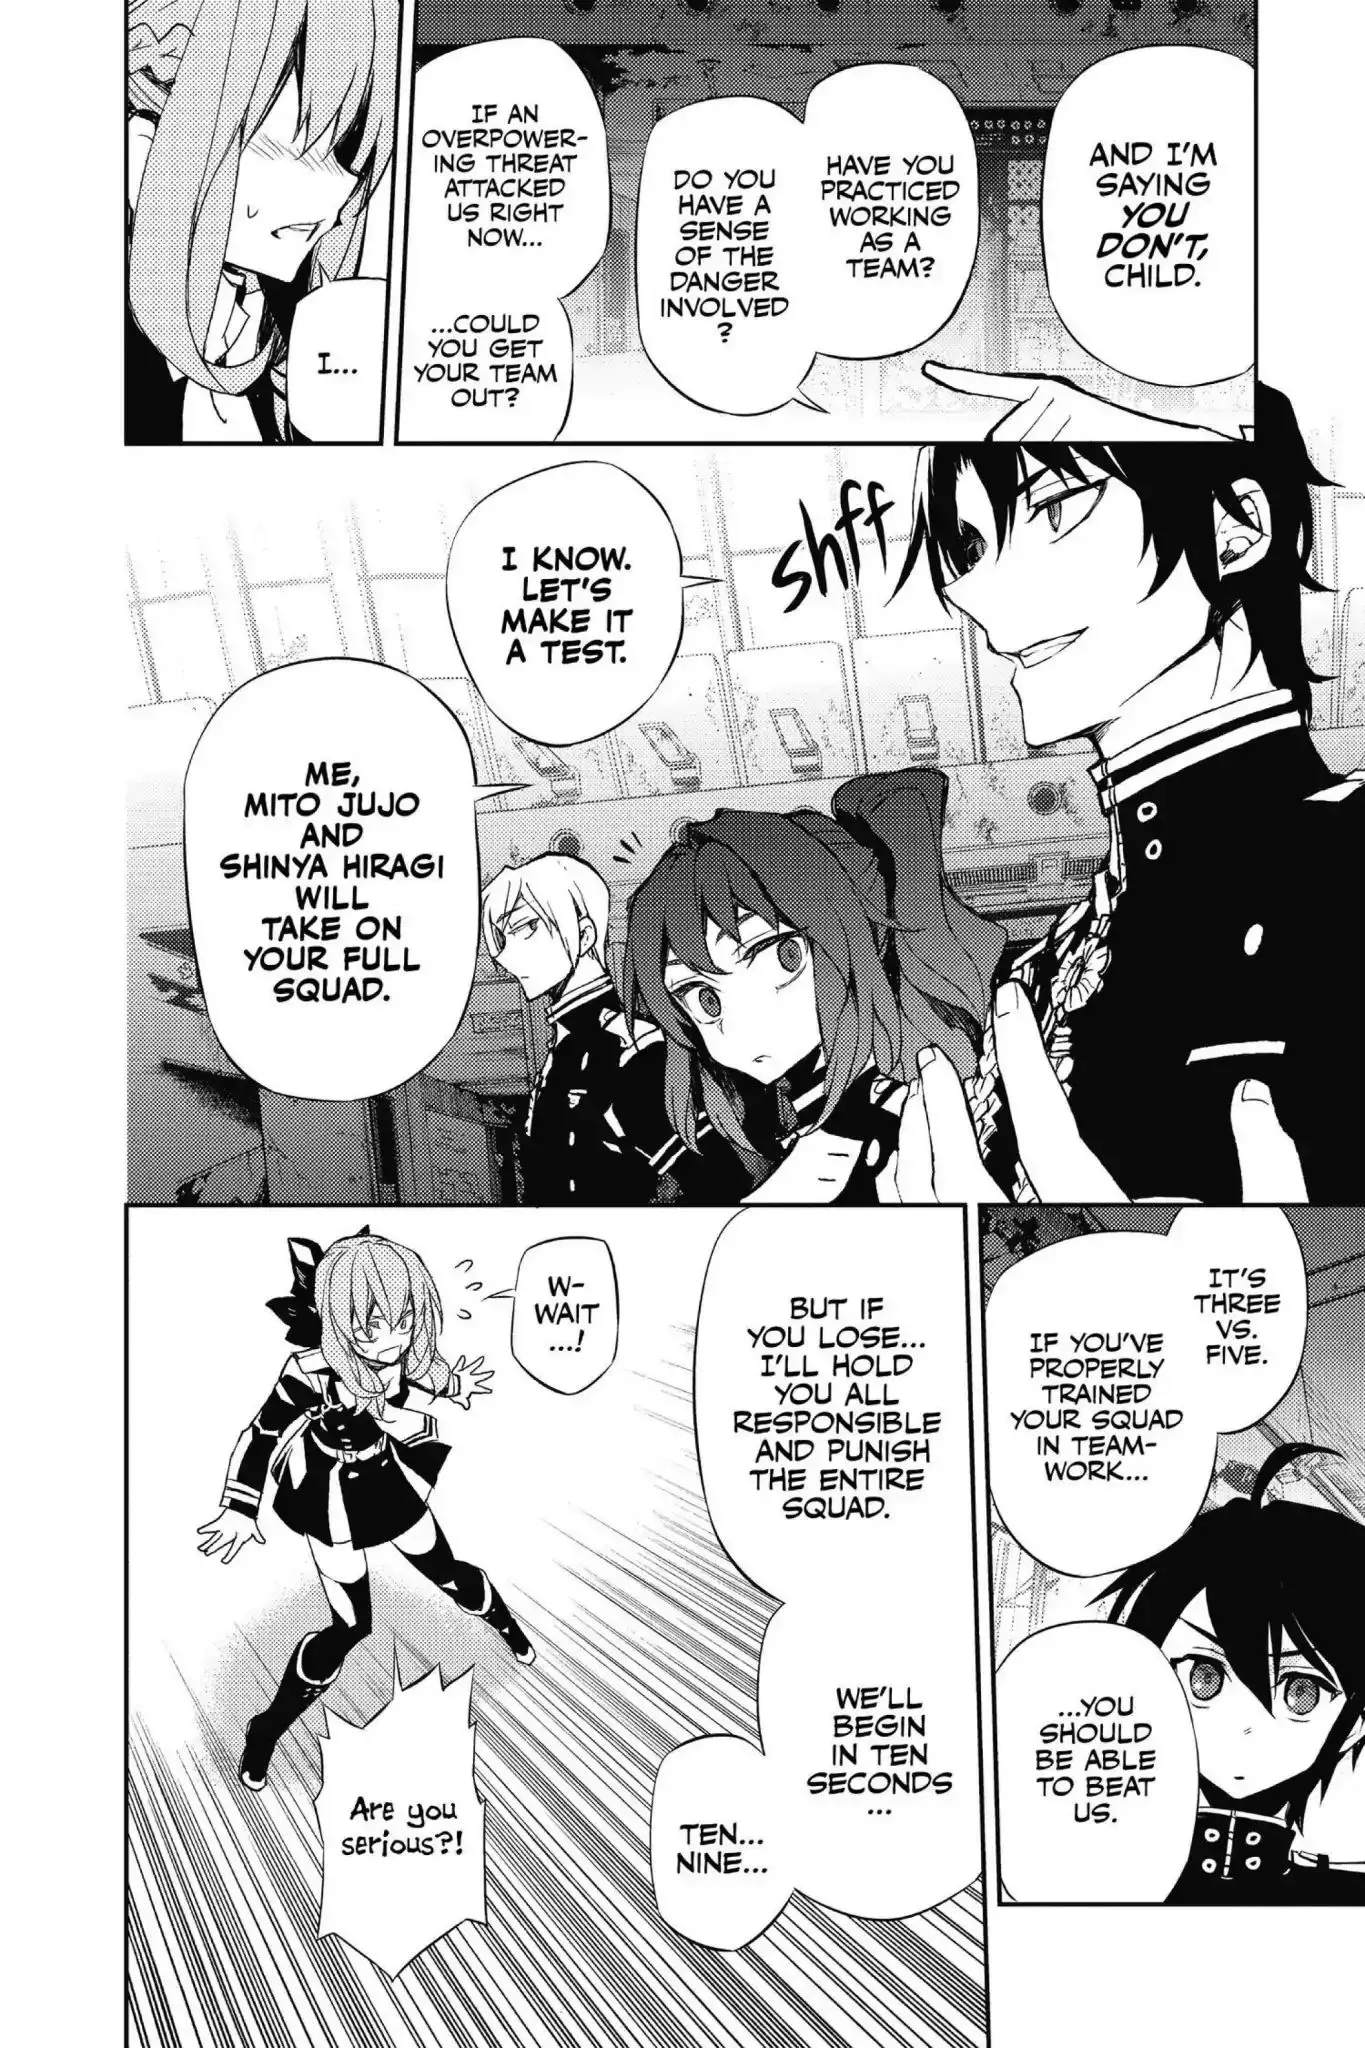 Seraph Of The End - 25 page 30-0d9b074d